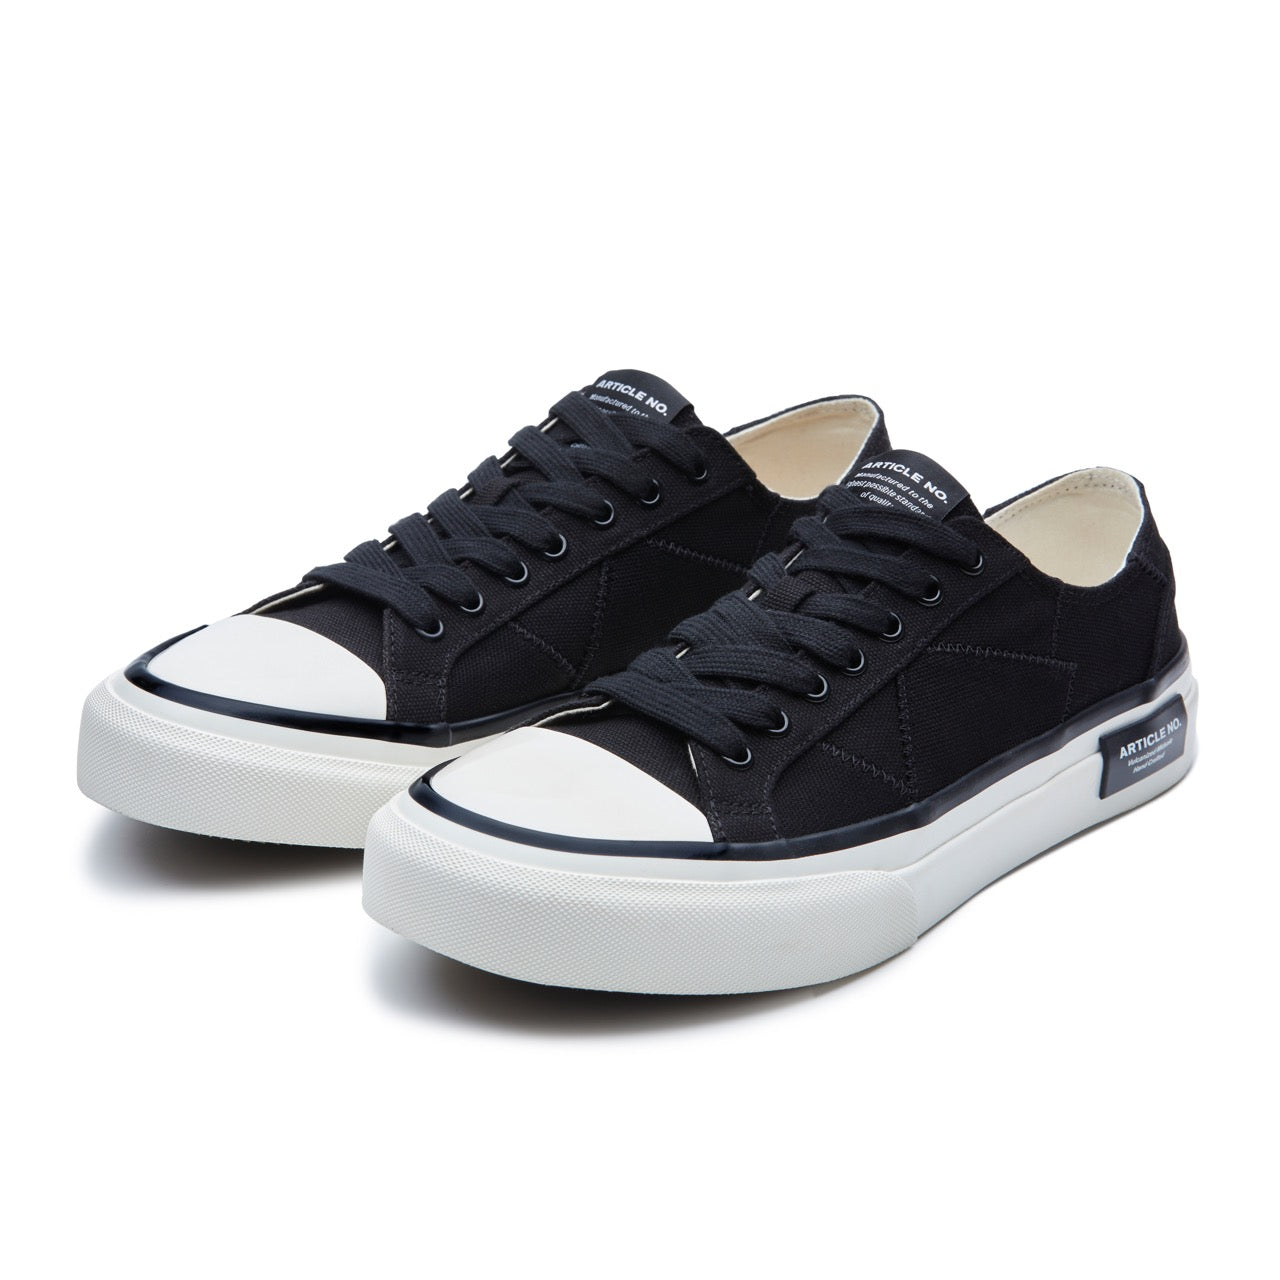 ARTICLE NO. 1007-S5007 BLACK PATCHWORK LOW-TOP VULCANIZED